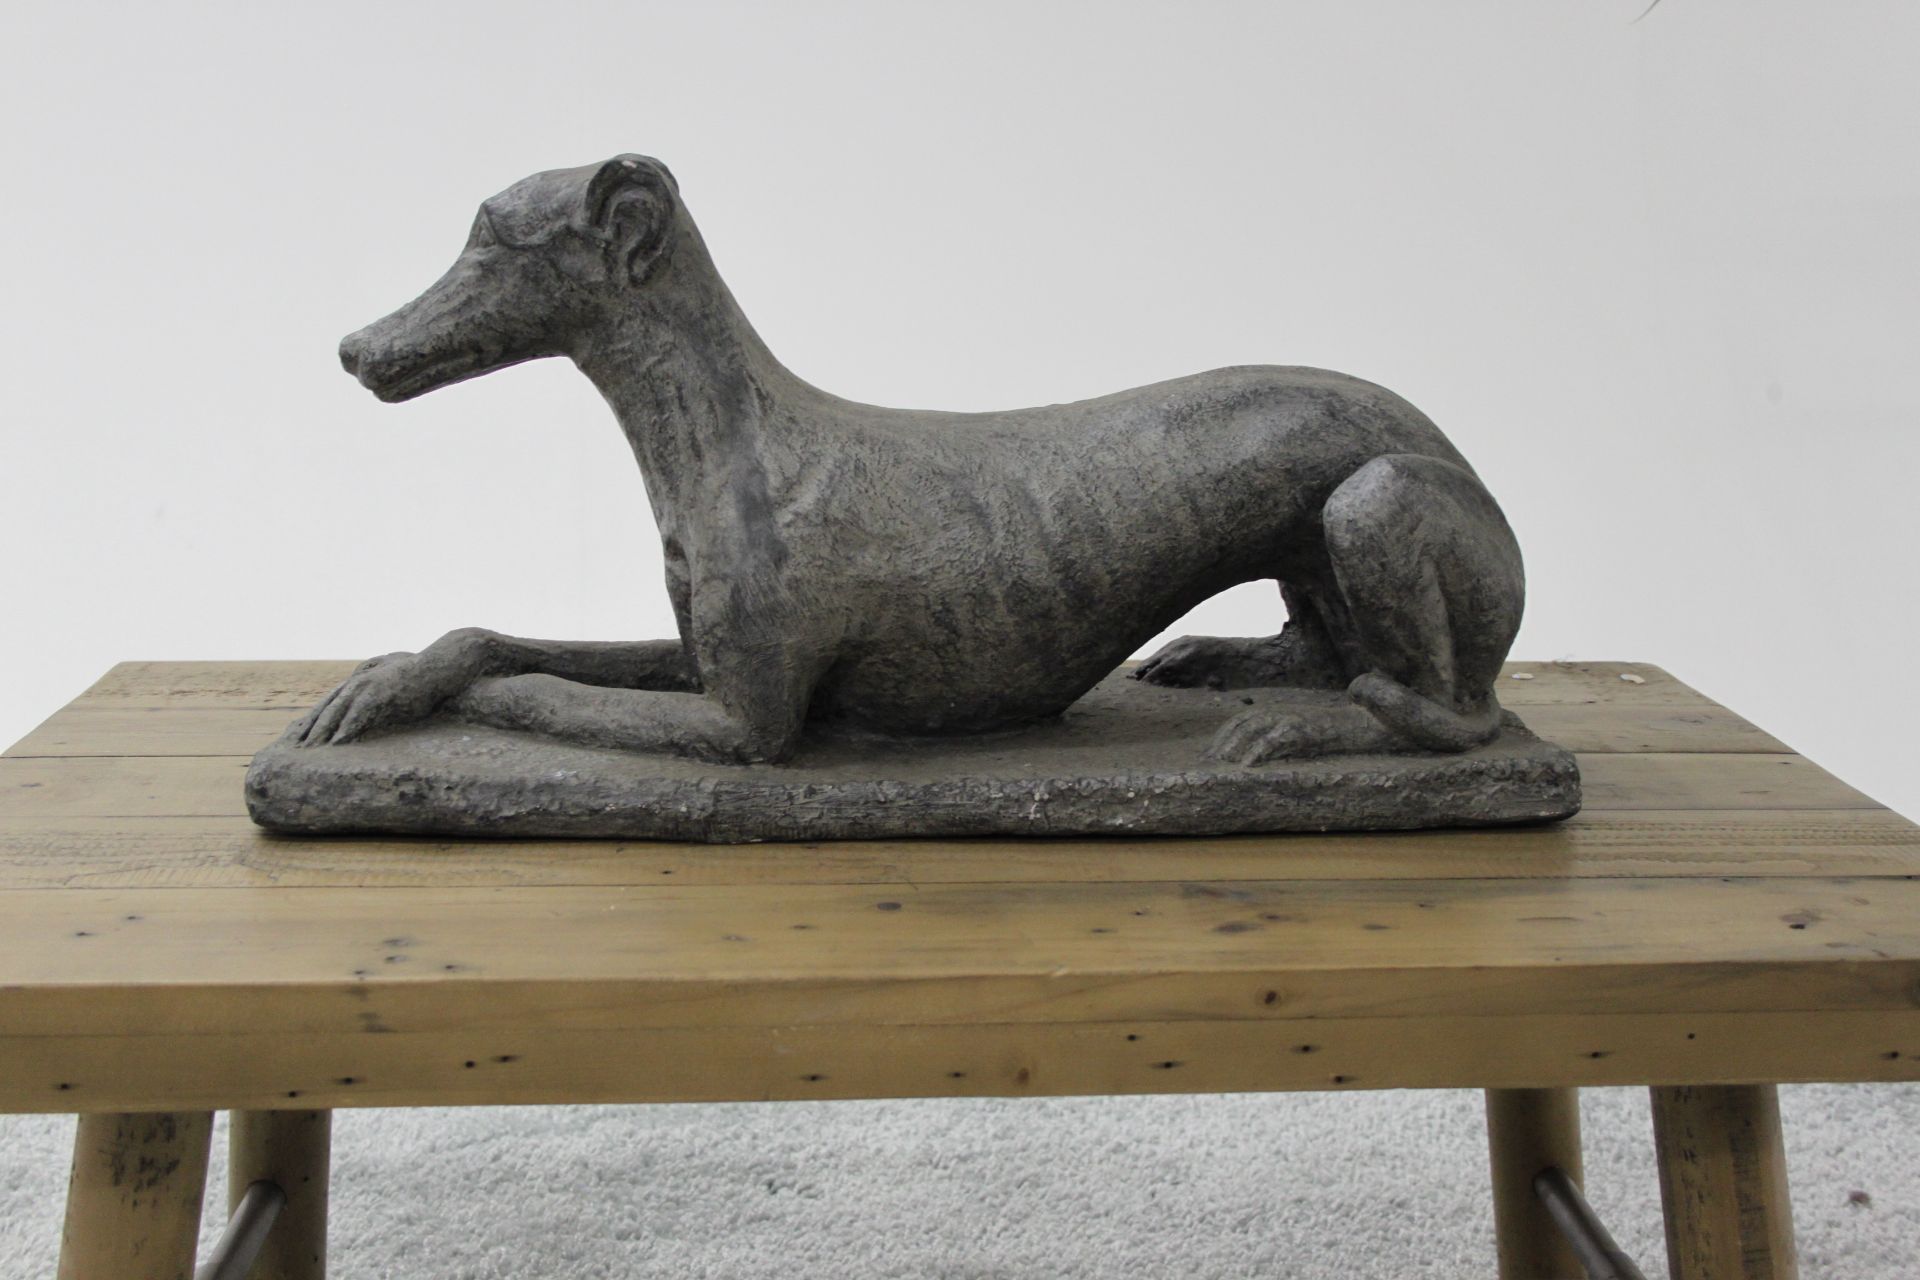 Set Of 2 Lying Dog Cast Resin Statues That Look Amazing 60 X 21 X 30cm (Loc Grc49) - Image 3 of 3